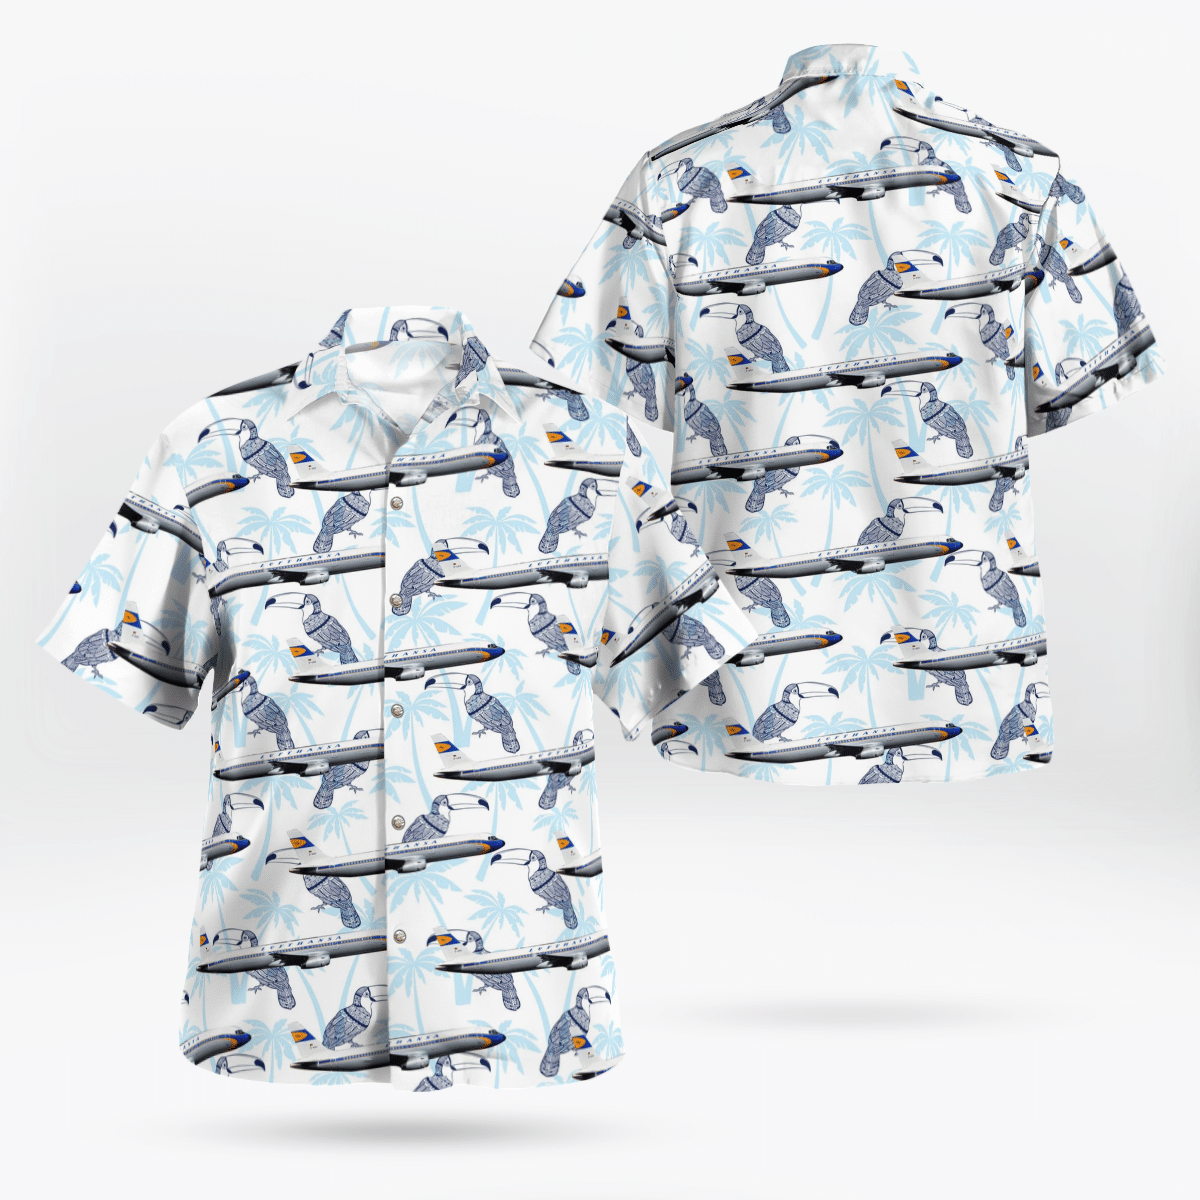 If you are in need of a new summertime look, pick up this Hawaiian shirt 95